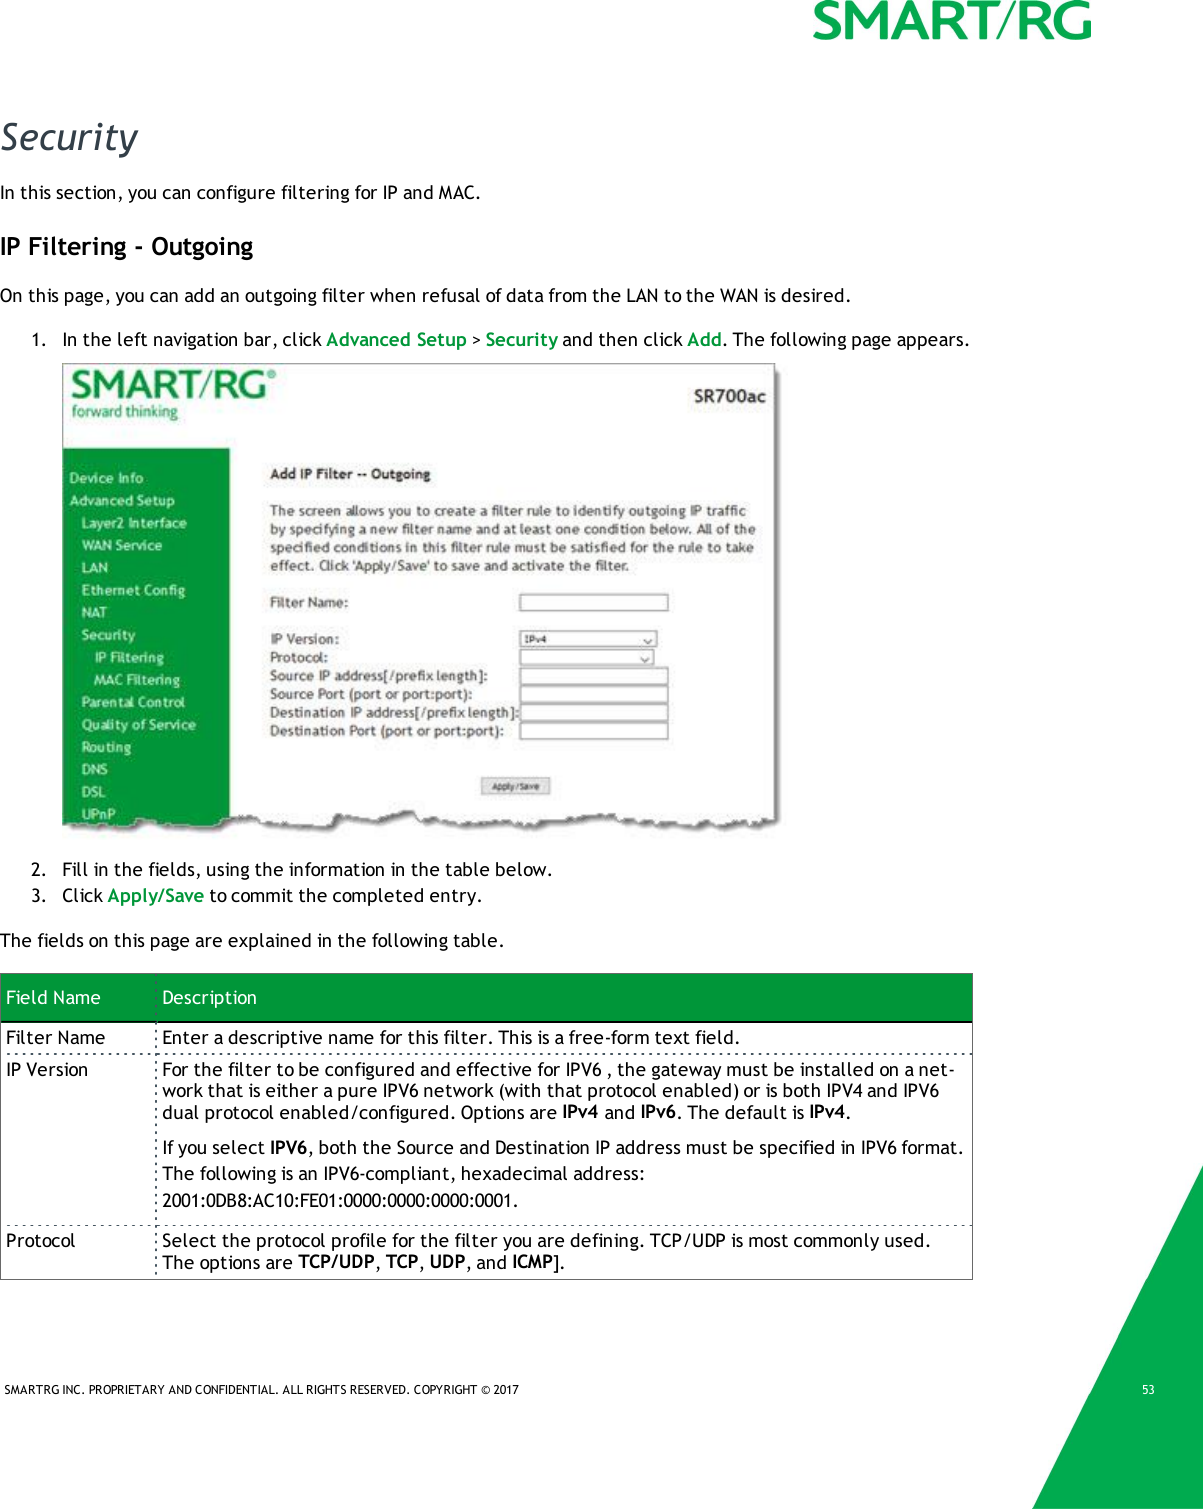 SMARTRG INC. PROPRIETARY AND CONFIDENTIAL. ALL RIGHTS RESERVED. COPYRIGHT © 2017 53SecurityIn this section, you can configure filtering for IP and MAC.IP Filtering - OutgoingOn this page, you can add an outgoing filter when refusal of data from the LAN to the WAN is desired.1. In the left navigation bar, click Advanced Setup &gt;Security and then click Add. The following page appears.2. Fill in the fields, using the information in the table below.3. Click Apply/Save to commit the completed entry.The fields on this page are explained in the following table.Field Name DescriptionFilter Name Enter a descriptive name for this filter. This is a free-form text field.IP Version For the filter to be configured and effective for IPV6 , the gateway must be installed on a net-work that is either a pure IPV6 network (with that protocol enabled) or is both IPV4 and IPV6dual protocol enabled/configured. Options are IPv4 and IPv6. The default is IPv4.If you select IPV6, both the Source and Destination IP address must be specified in IPV6 format.The following is an IPV6-compliant, hexadecimal address:2001:0DB8:AC10:FE01:0000:0000:0000:0001.Protocol Select the protocol profile for the filter you are defining. TCP/UDP is most commonly used.The options are TCP/UDP,TCP,UDP, and ICMP].